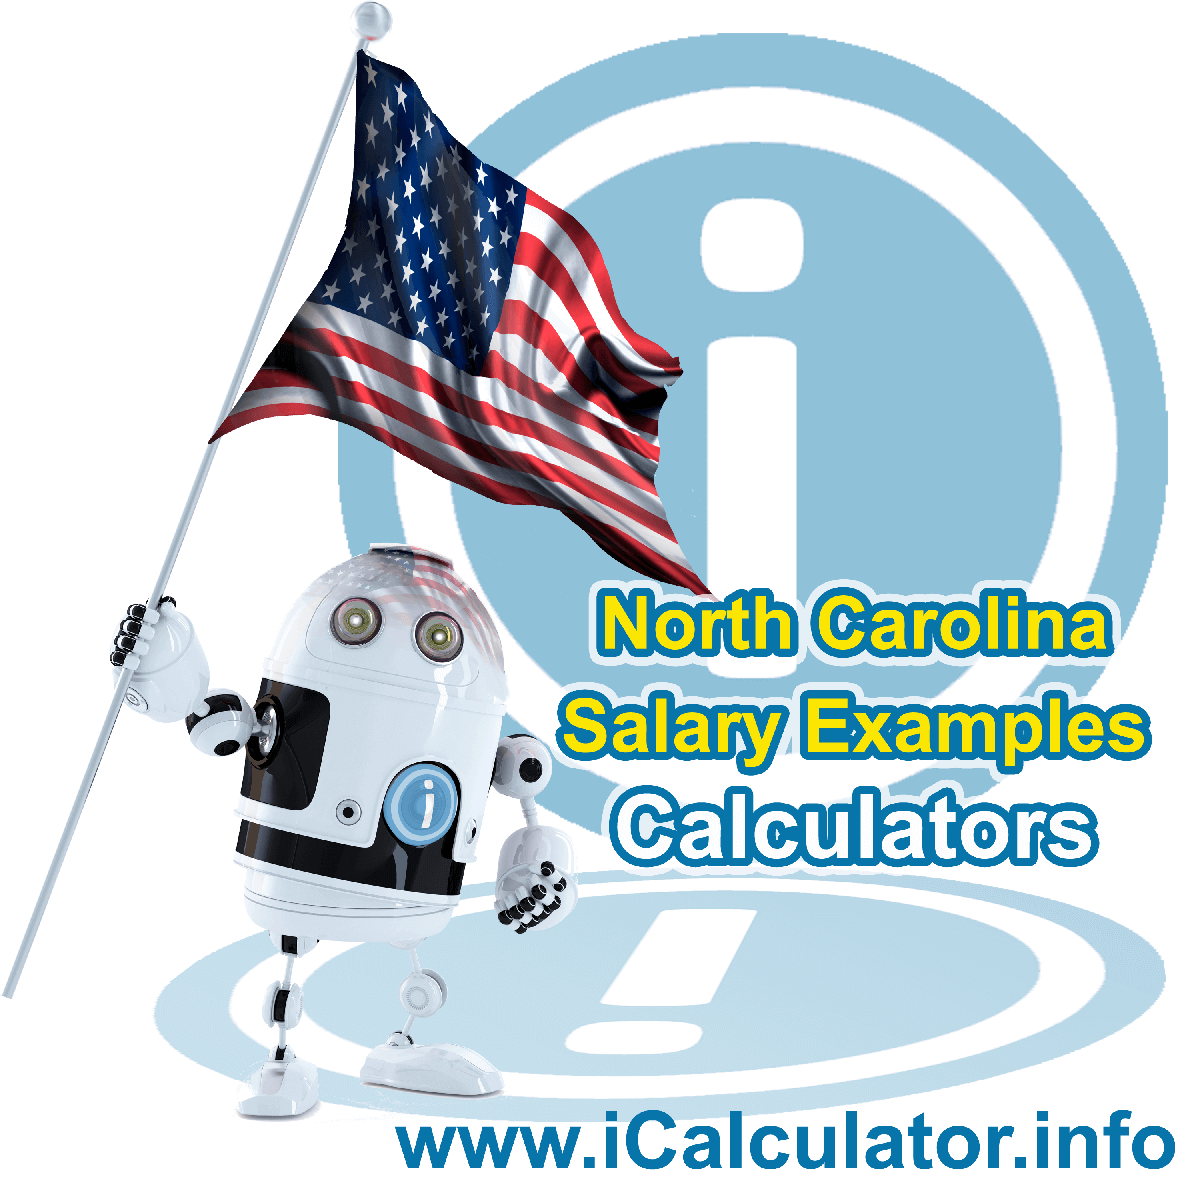 North Carolina Salary Example for $ 85,000.00 in 2023 | iCalculator™ | $ 85,000.00 salary example for employee and employer paying North Carolina State tincome taxes. Detailed salary after tax calculation including North Carolina State Tax, Federal State Tax, Medicare Deductions, Social Security, Capital Gains and other income tax and salary deductions complete with supporting North Carolina state tax tables 